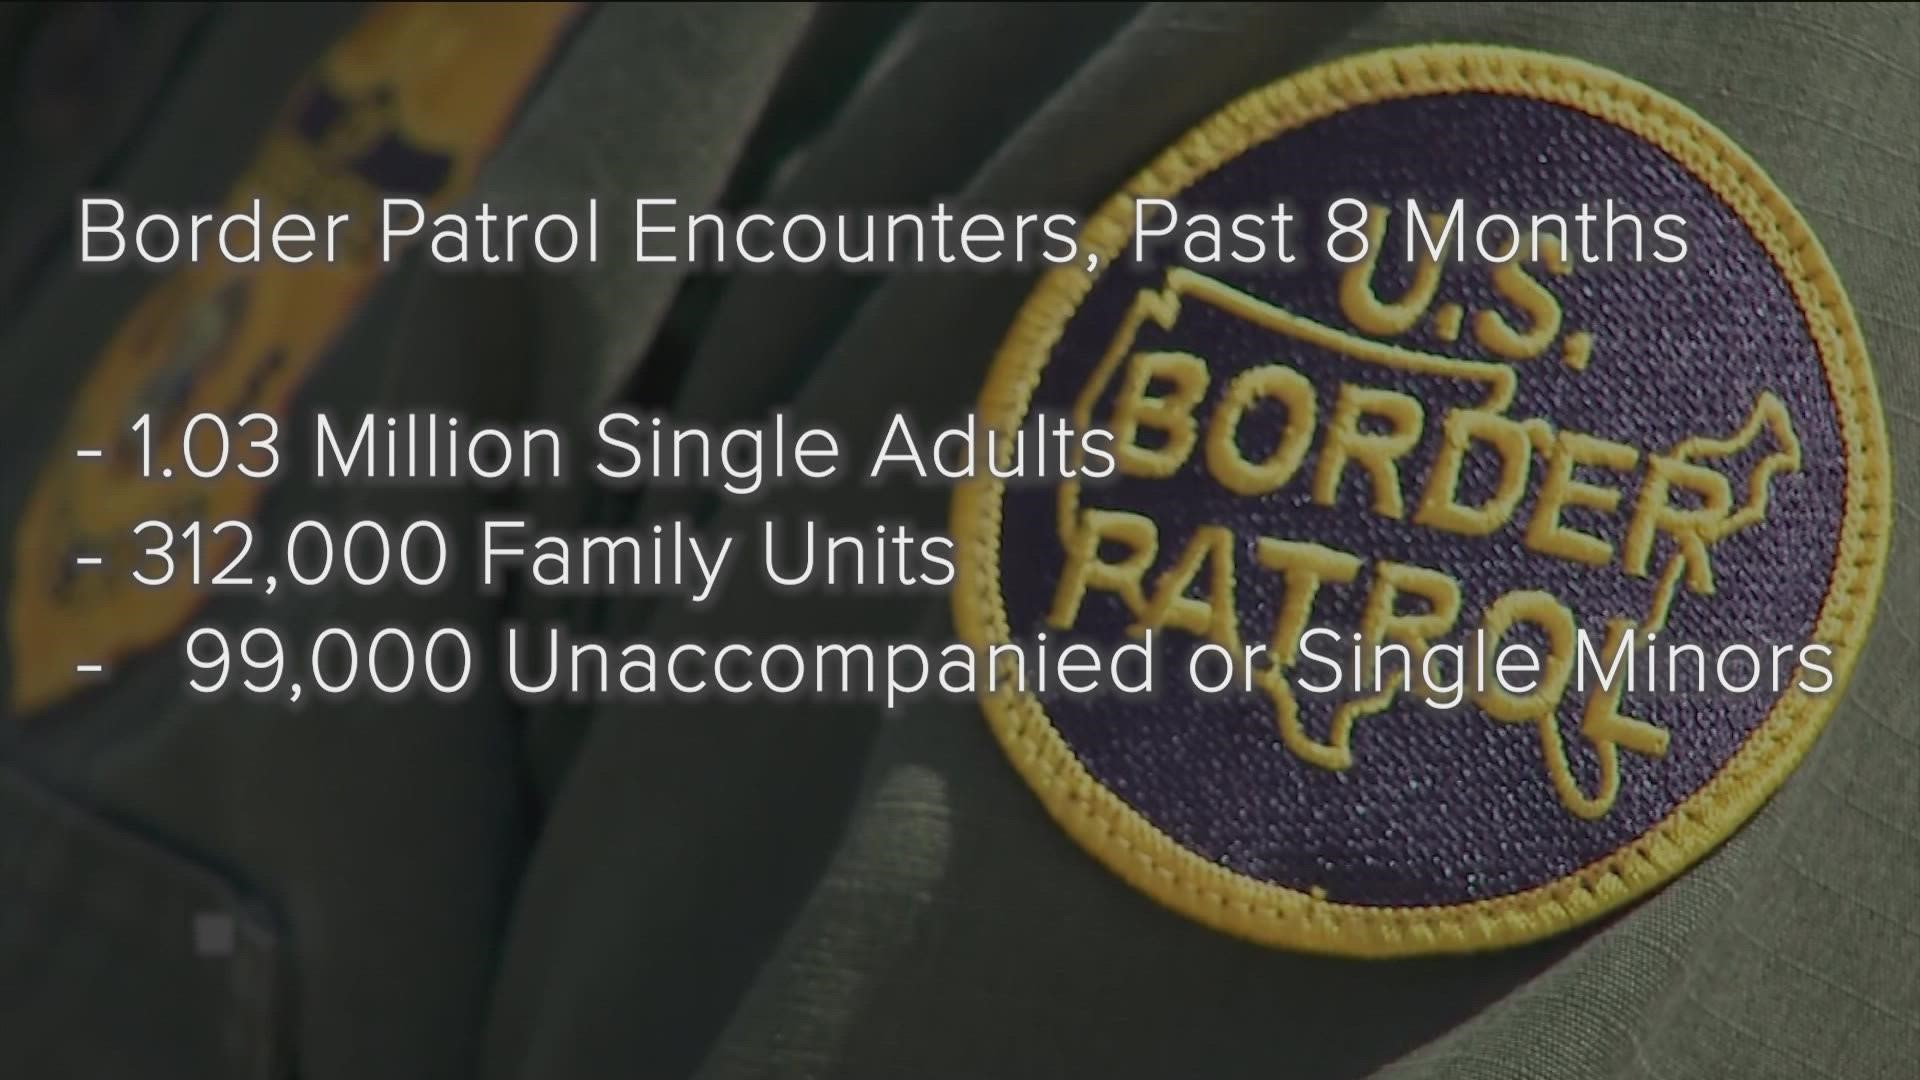 U.S. Customs and Border Protection reports they are seeing more families crossing the border.